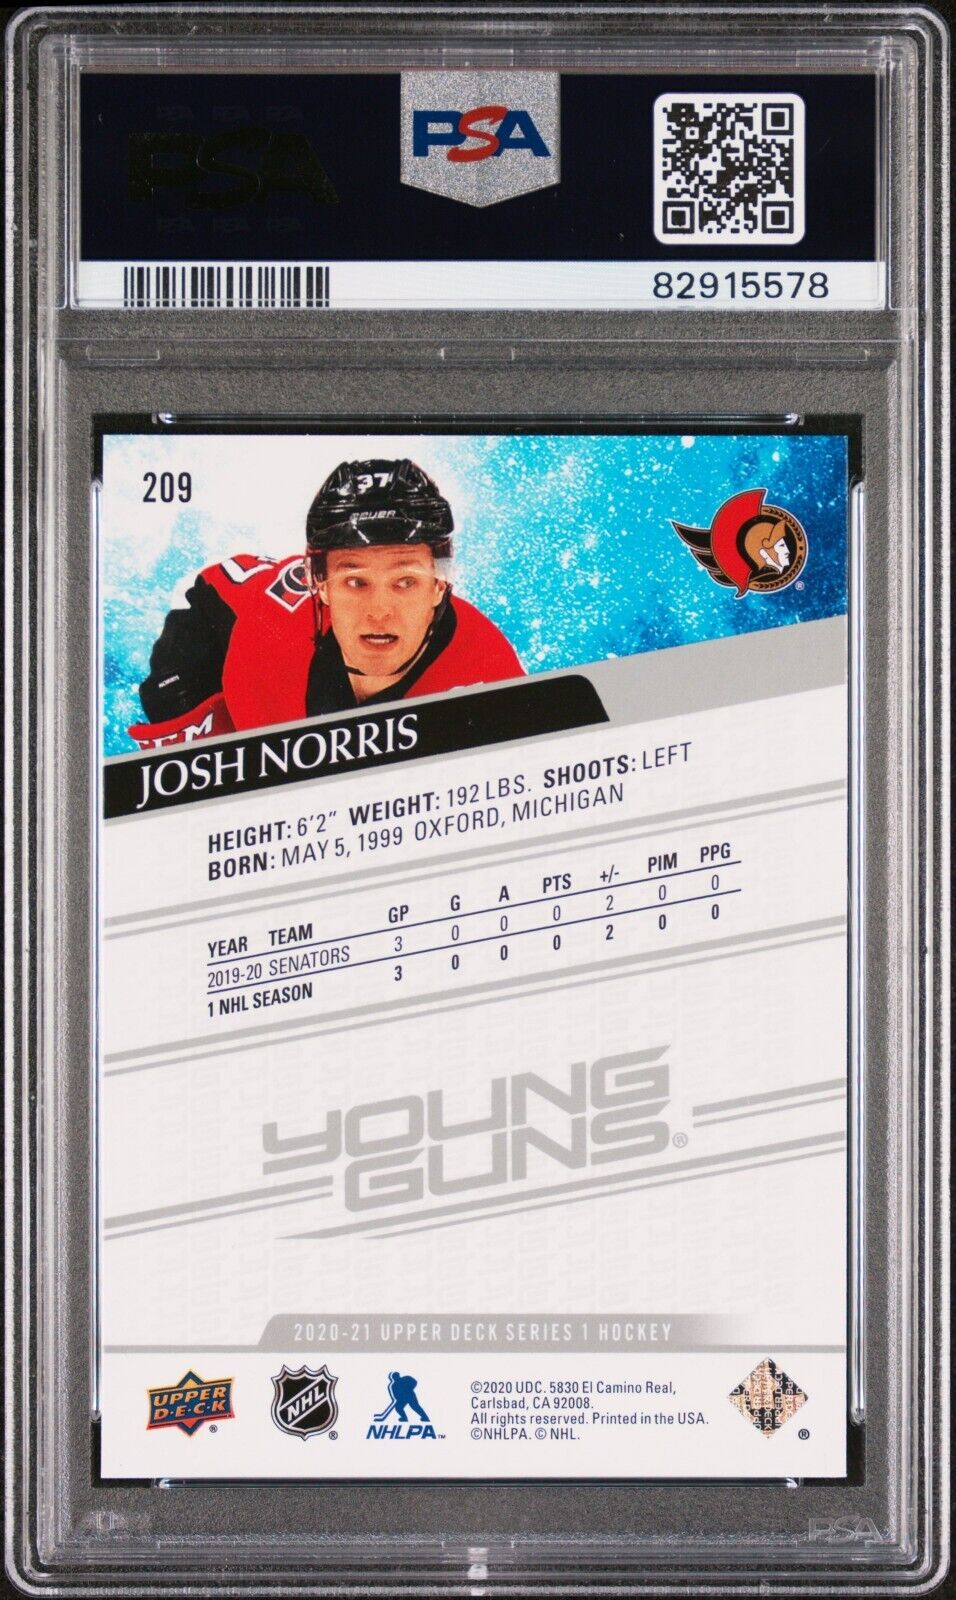 2020/21 Upper Deck Hockey Young Guns #209 Josh Norris Rookie Card RC PSA 10 - 643-collectibles